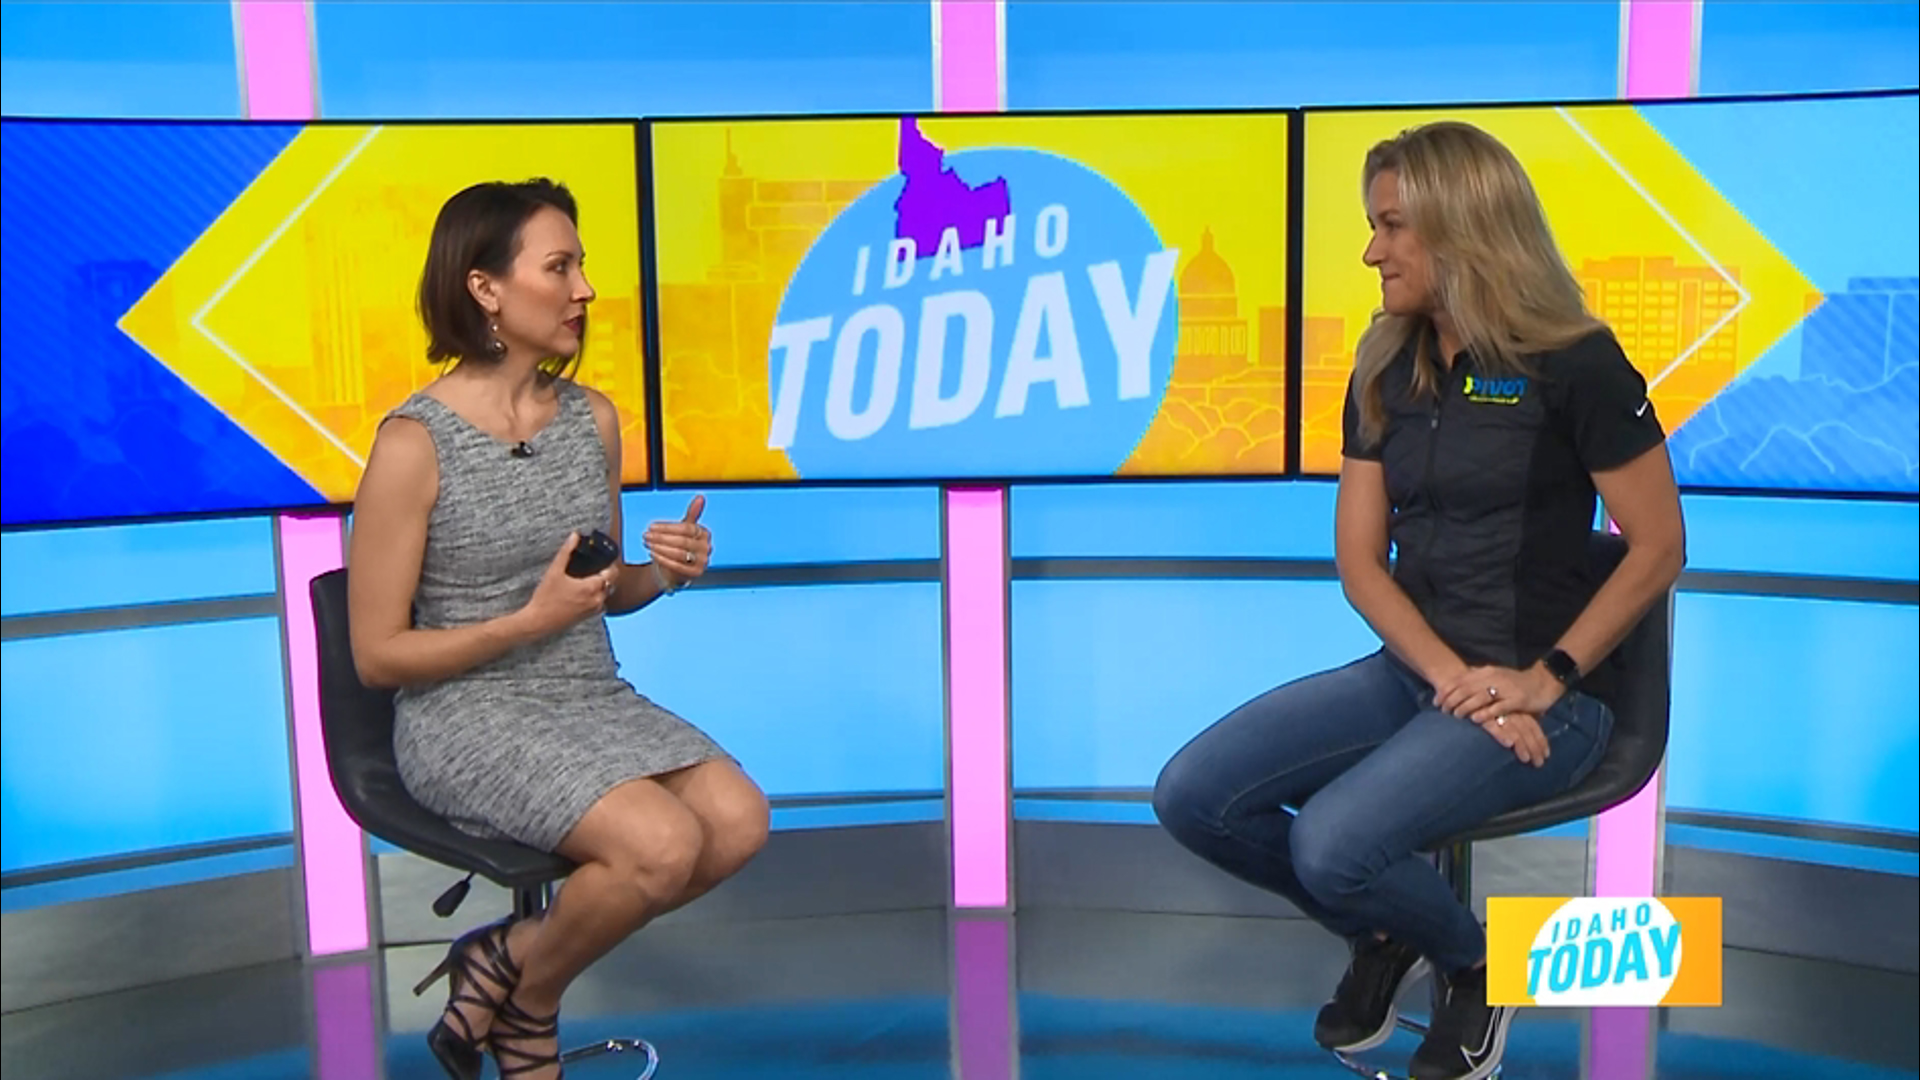 Gold Medalist & Pivot Fitness Owner, Kristin Armstrong shares tips on how to get into fitness & avoid injury. Plus, a new offering at Pivot Fitness + Lifestyle.